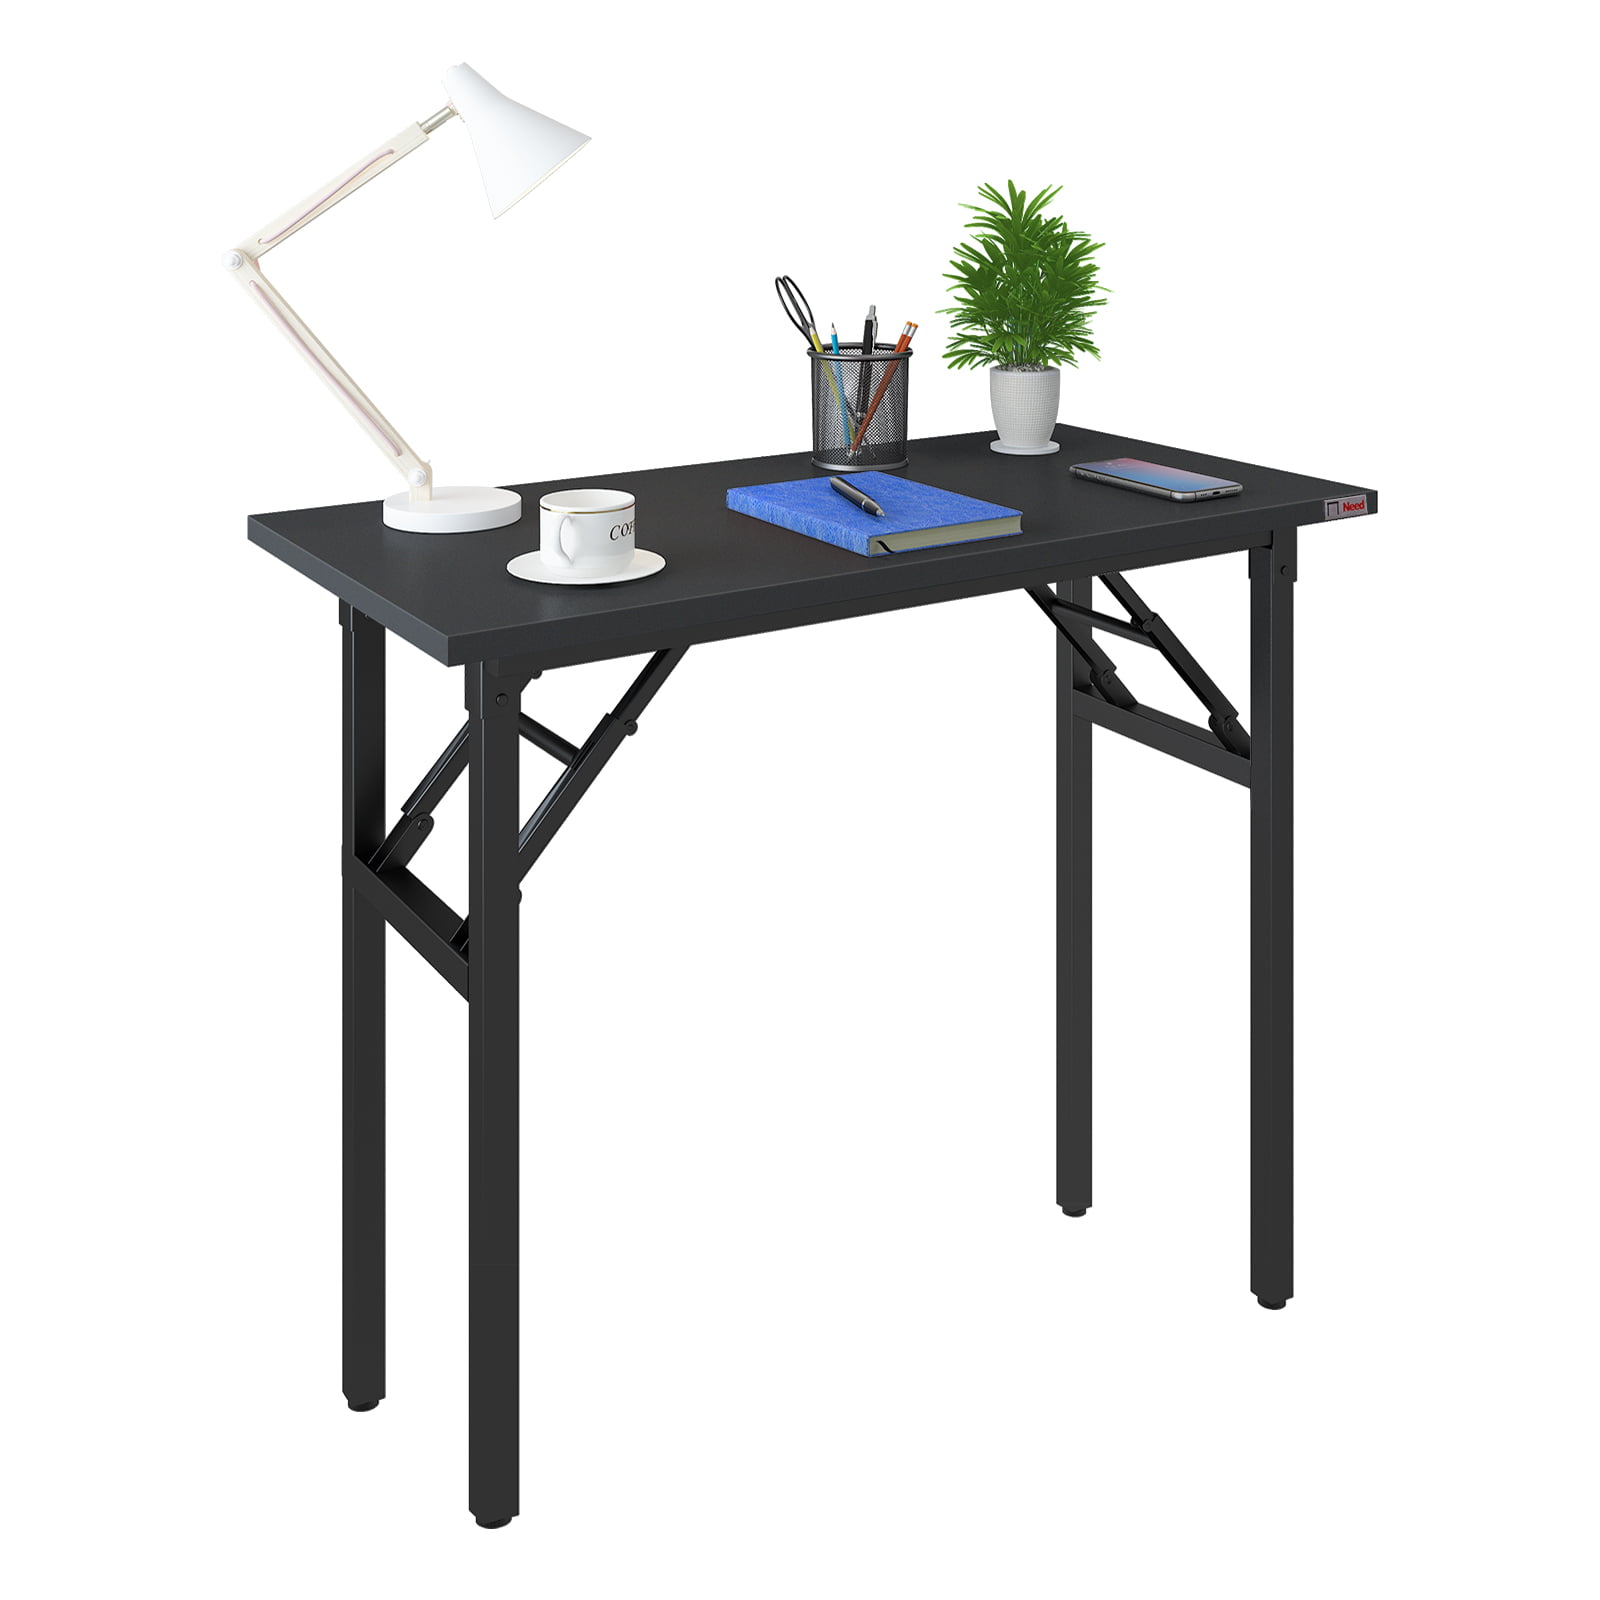 Folding Table Computer Desk Sturdy and Heavy Duty Writing Desk for Small Spaces（Black） No Assembly Required 